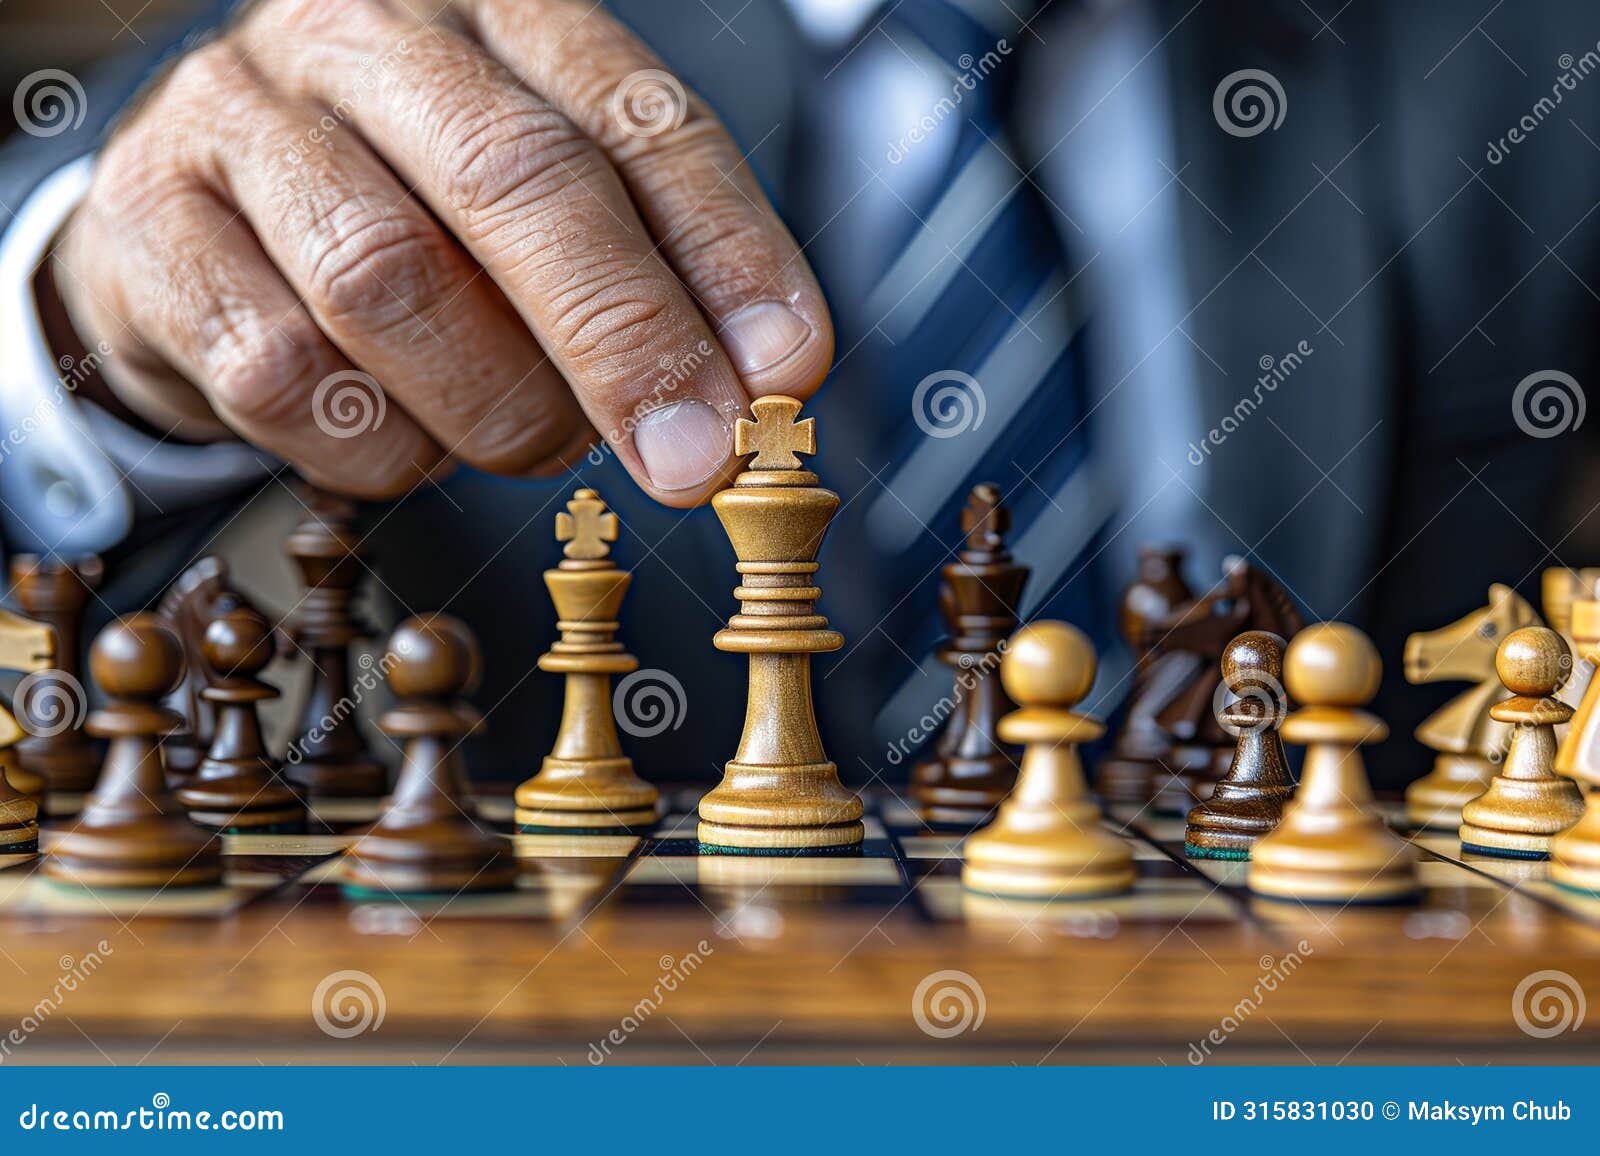 close up of corporate strategist strategically placing chess pieces for business planning